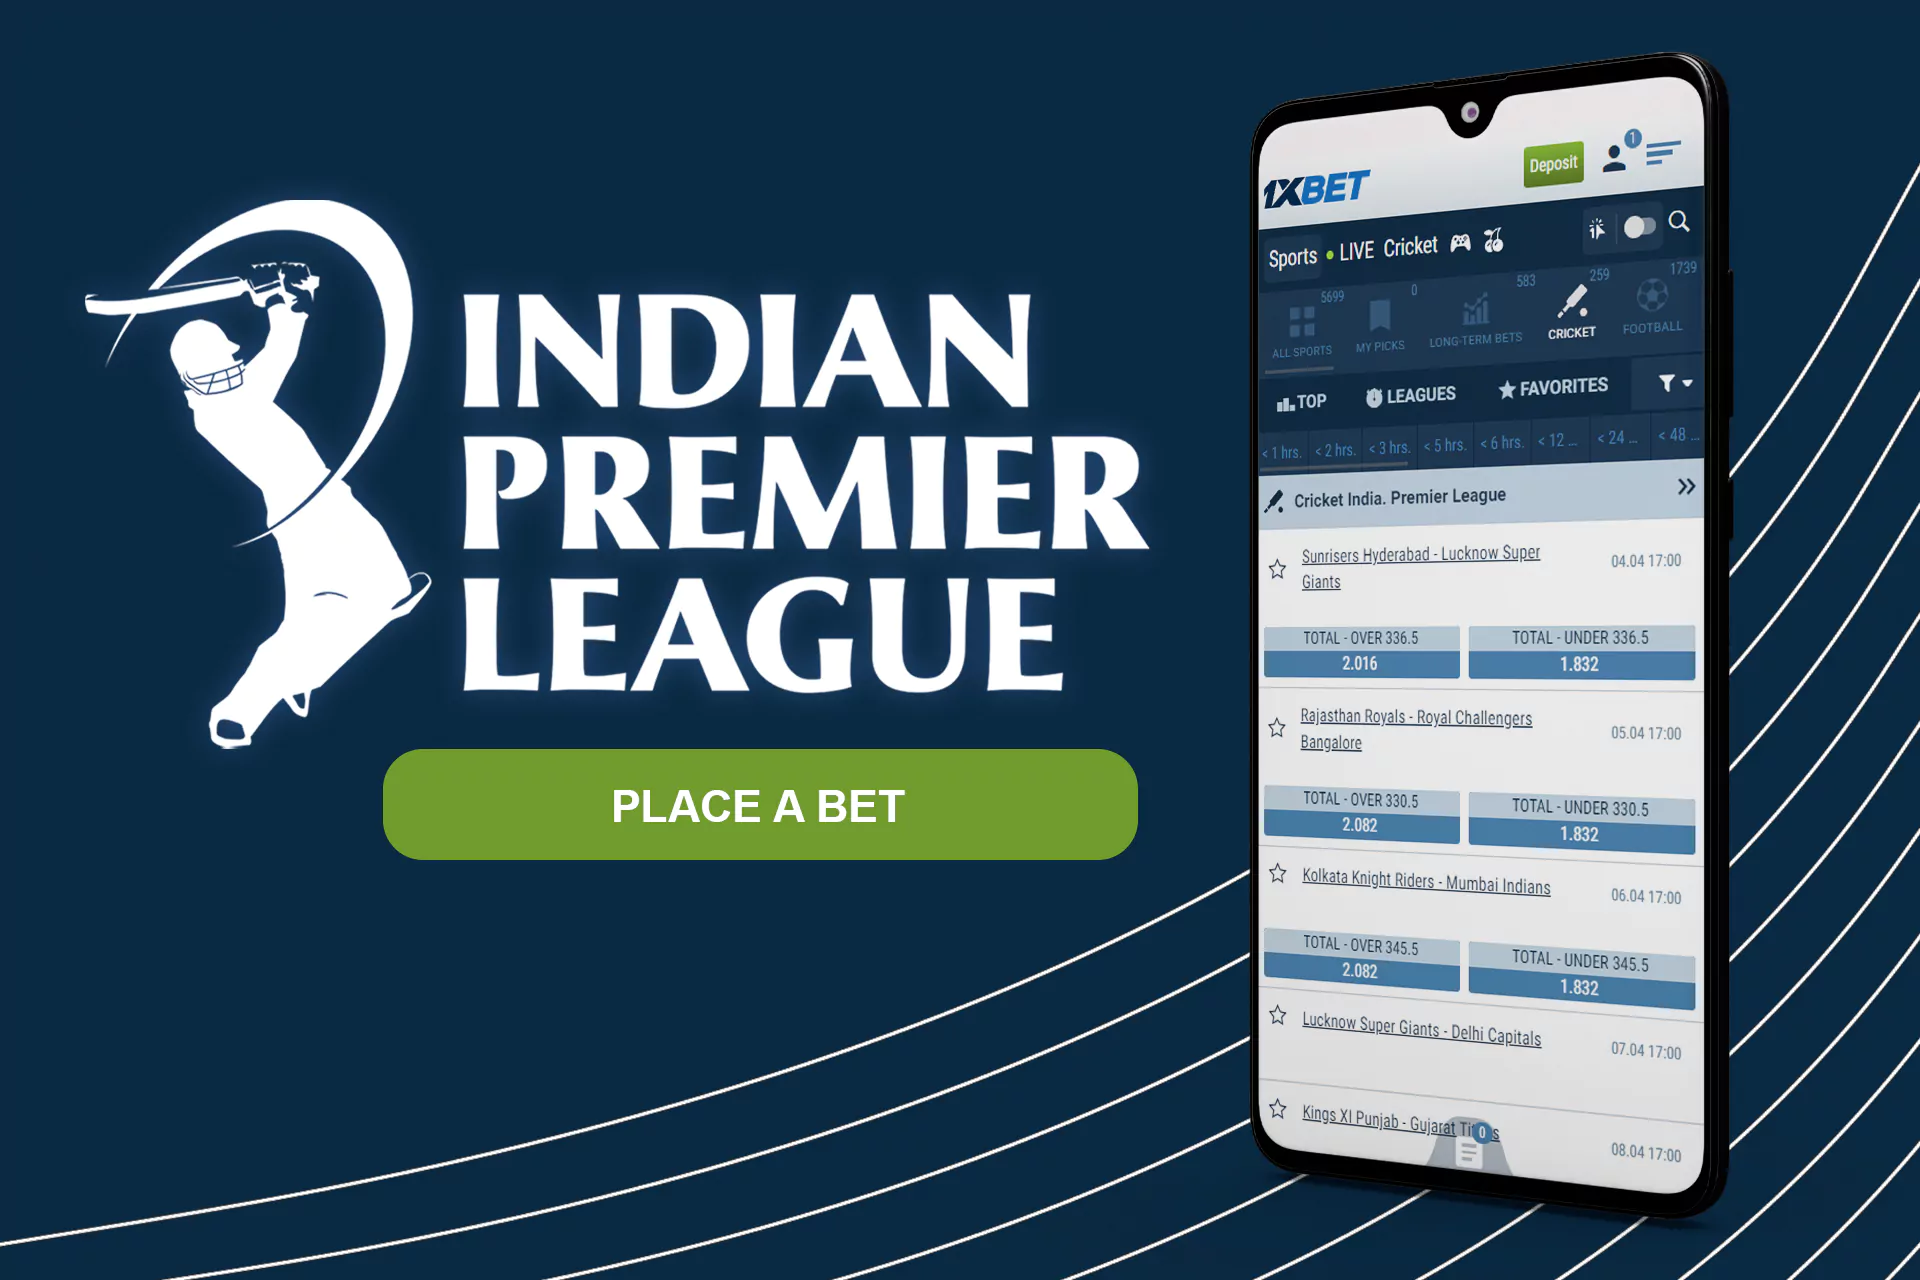 In the 1xBet app you can bet on IPL 2022.